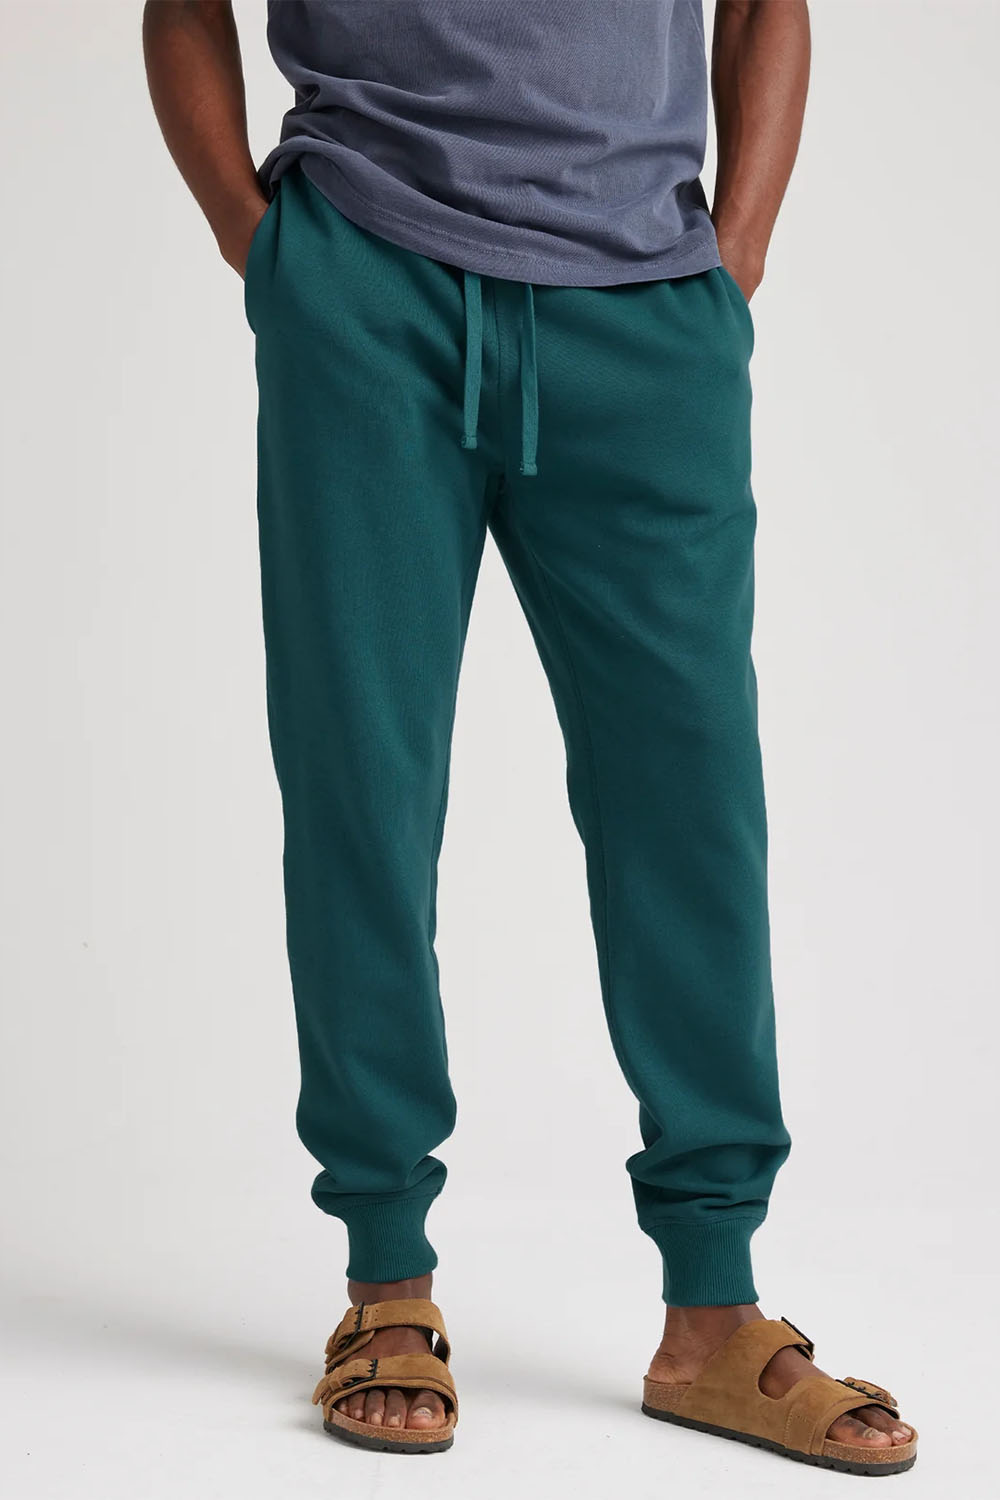 Richer Poorer - Recycled Sweatpant - Reflecting Pond - Front